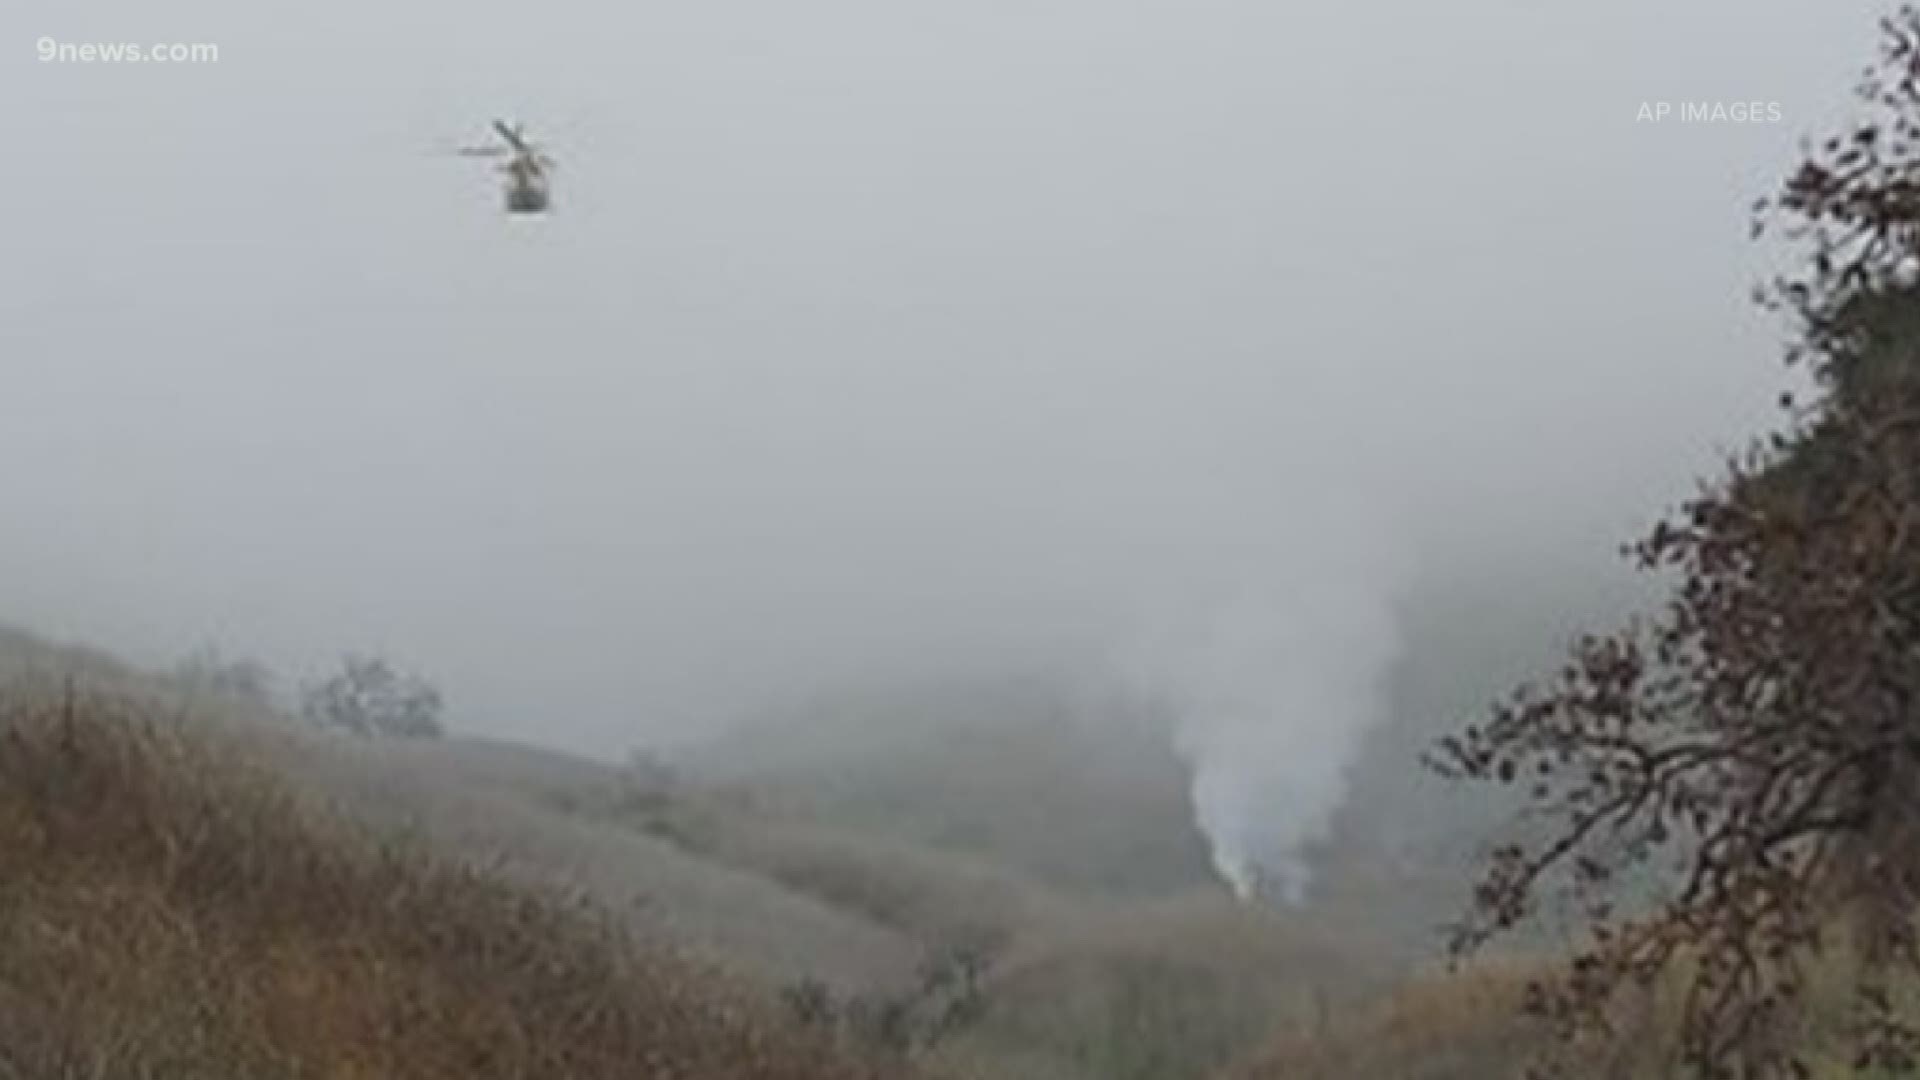 Congress passed a law requiring crash-resistant fuel systems onboard every new helicopter, but it's unclear if anyone survived the SoCal crash but died in the fire.